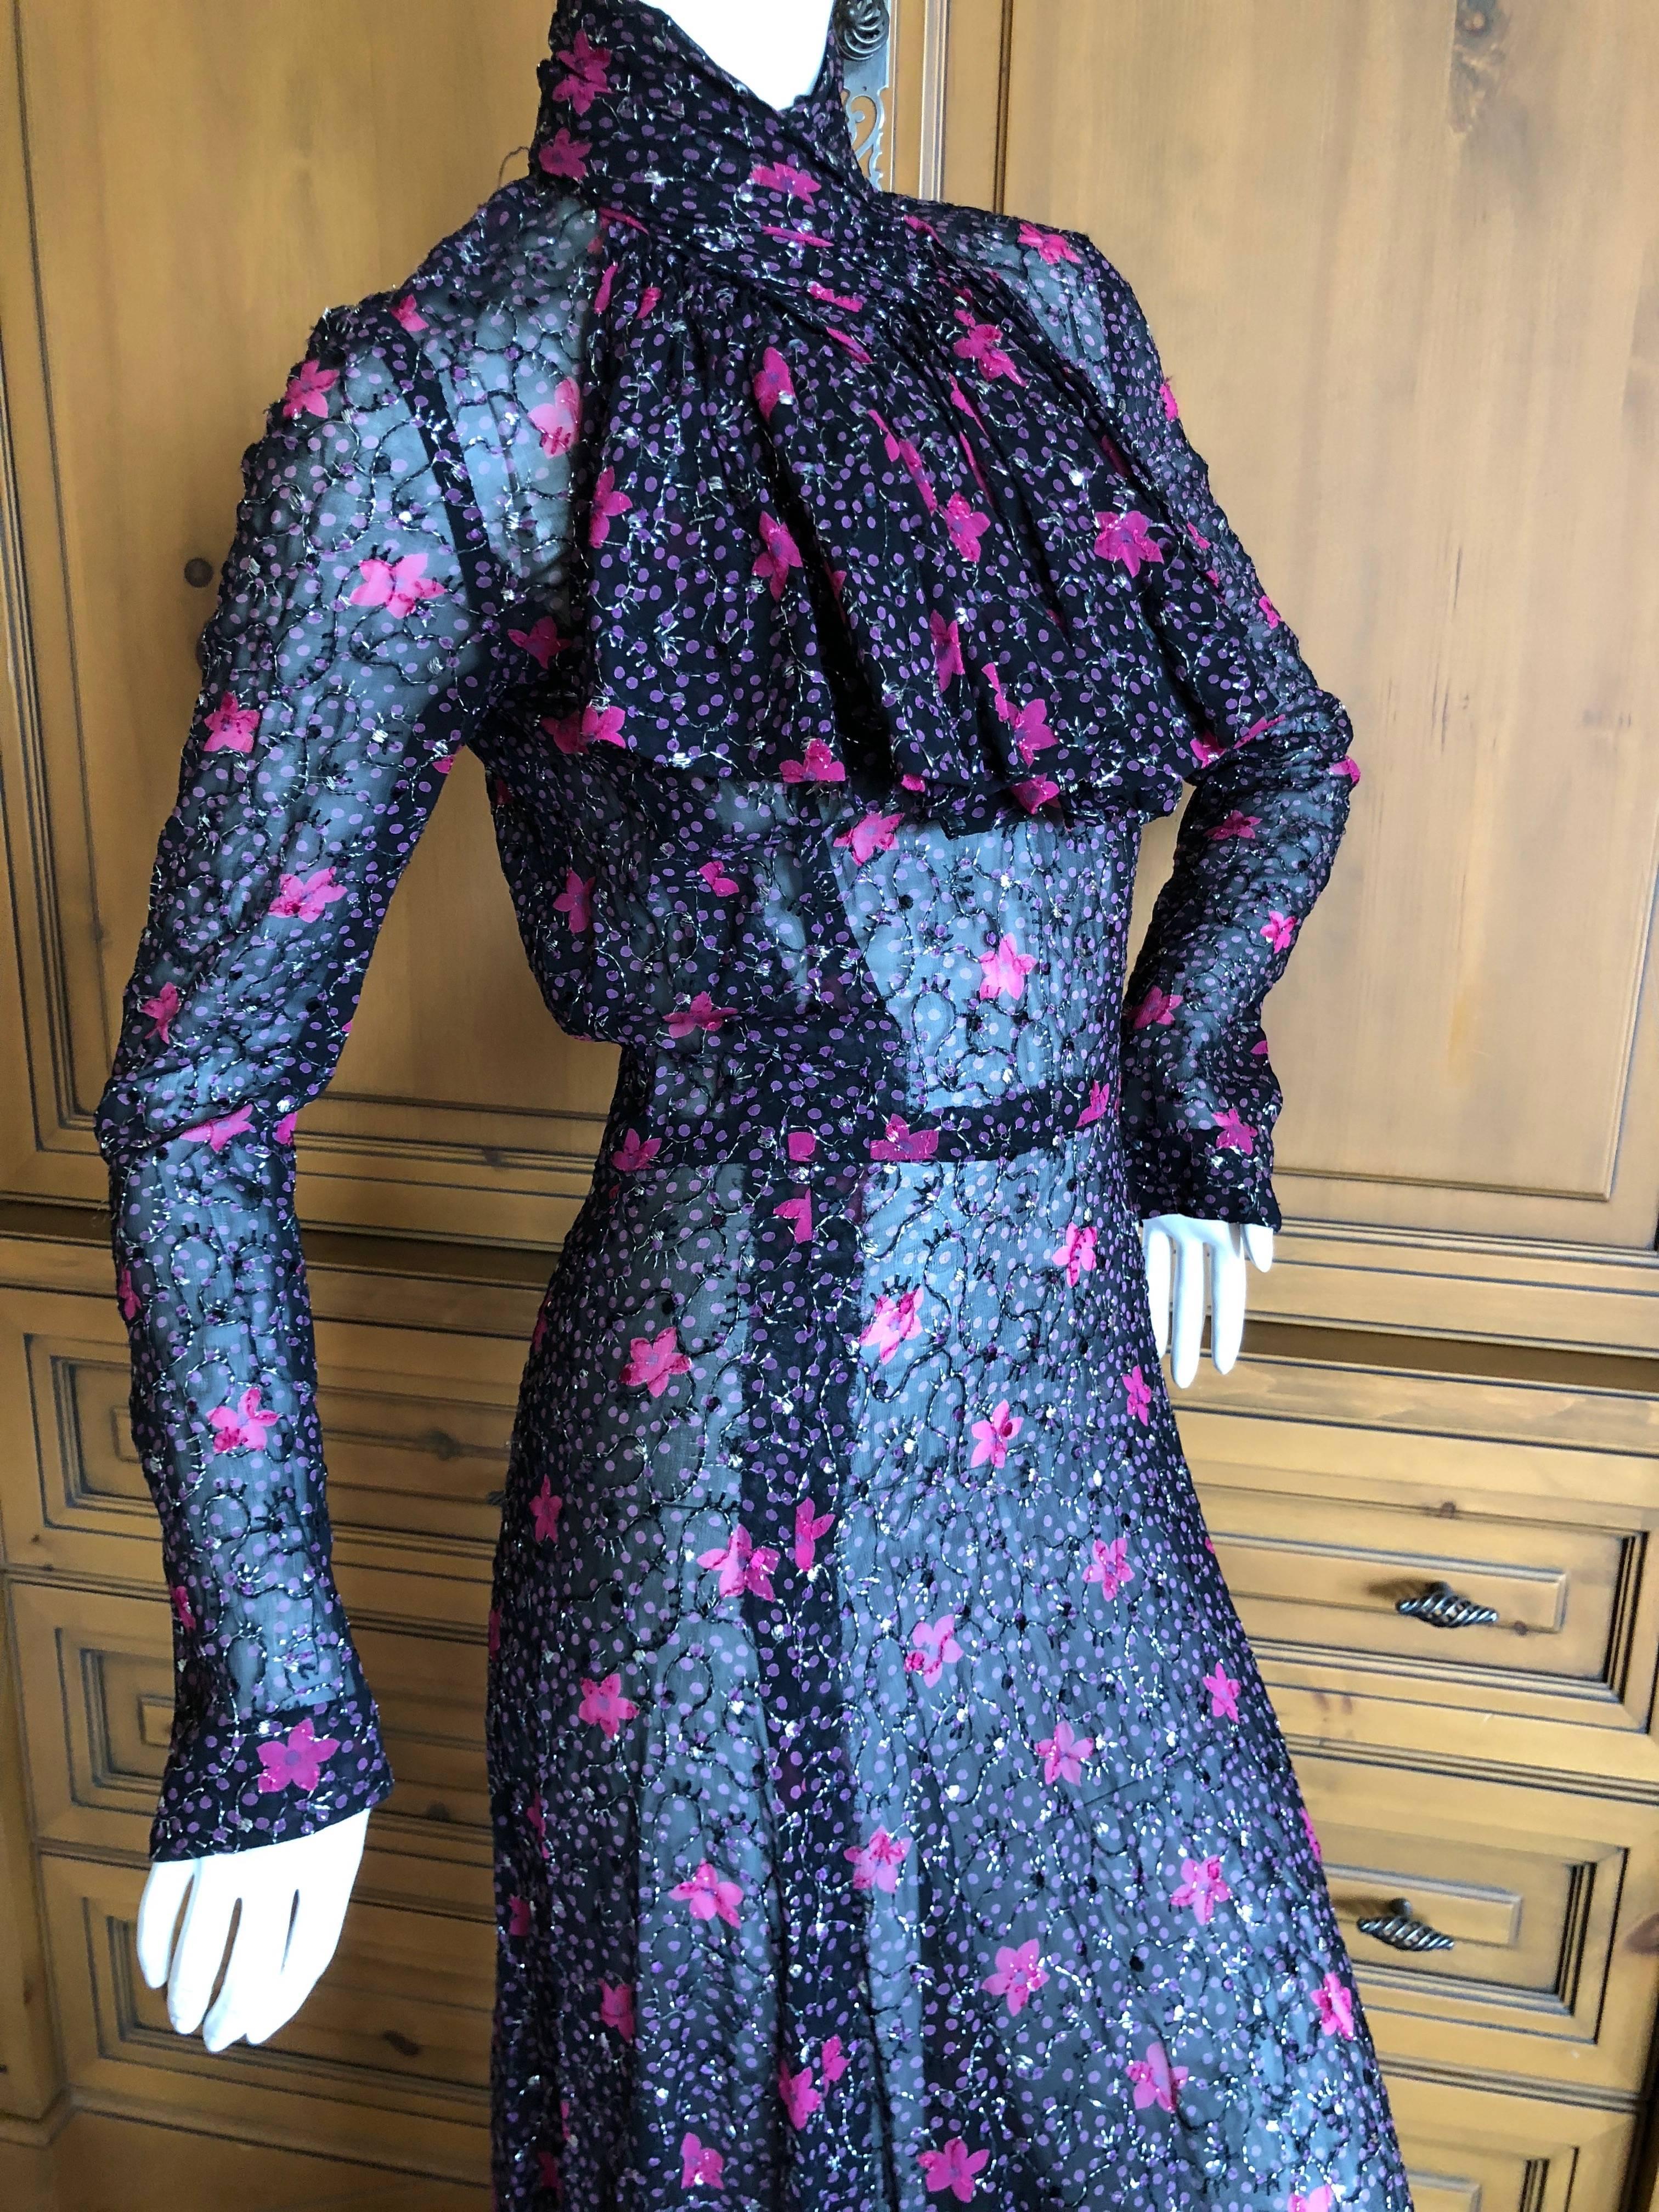 Cardinali Sheer Metallic Devore Velvet Floral Pattern Evening Dress

From the Archive of Marilyn Lewis, the creator of Cardinali
Cardinali was founded in Los Angeles in 1970, by Marilyn Lewis, who had already found success as the founder and owner